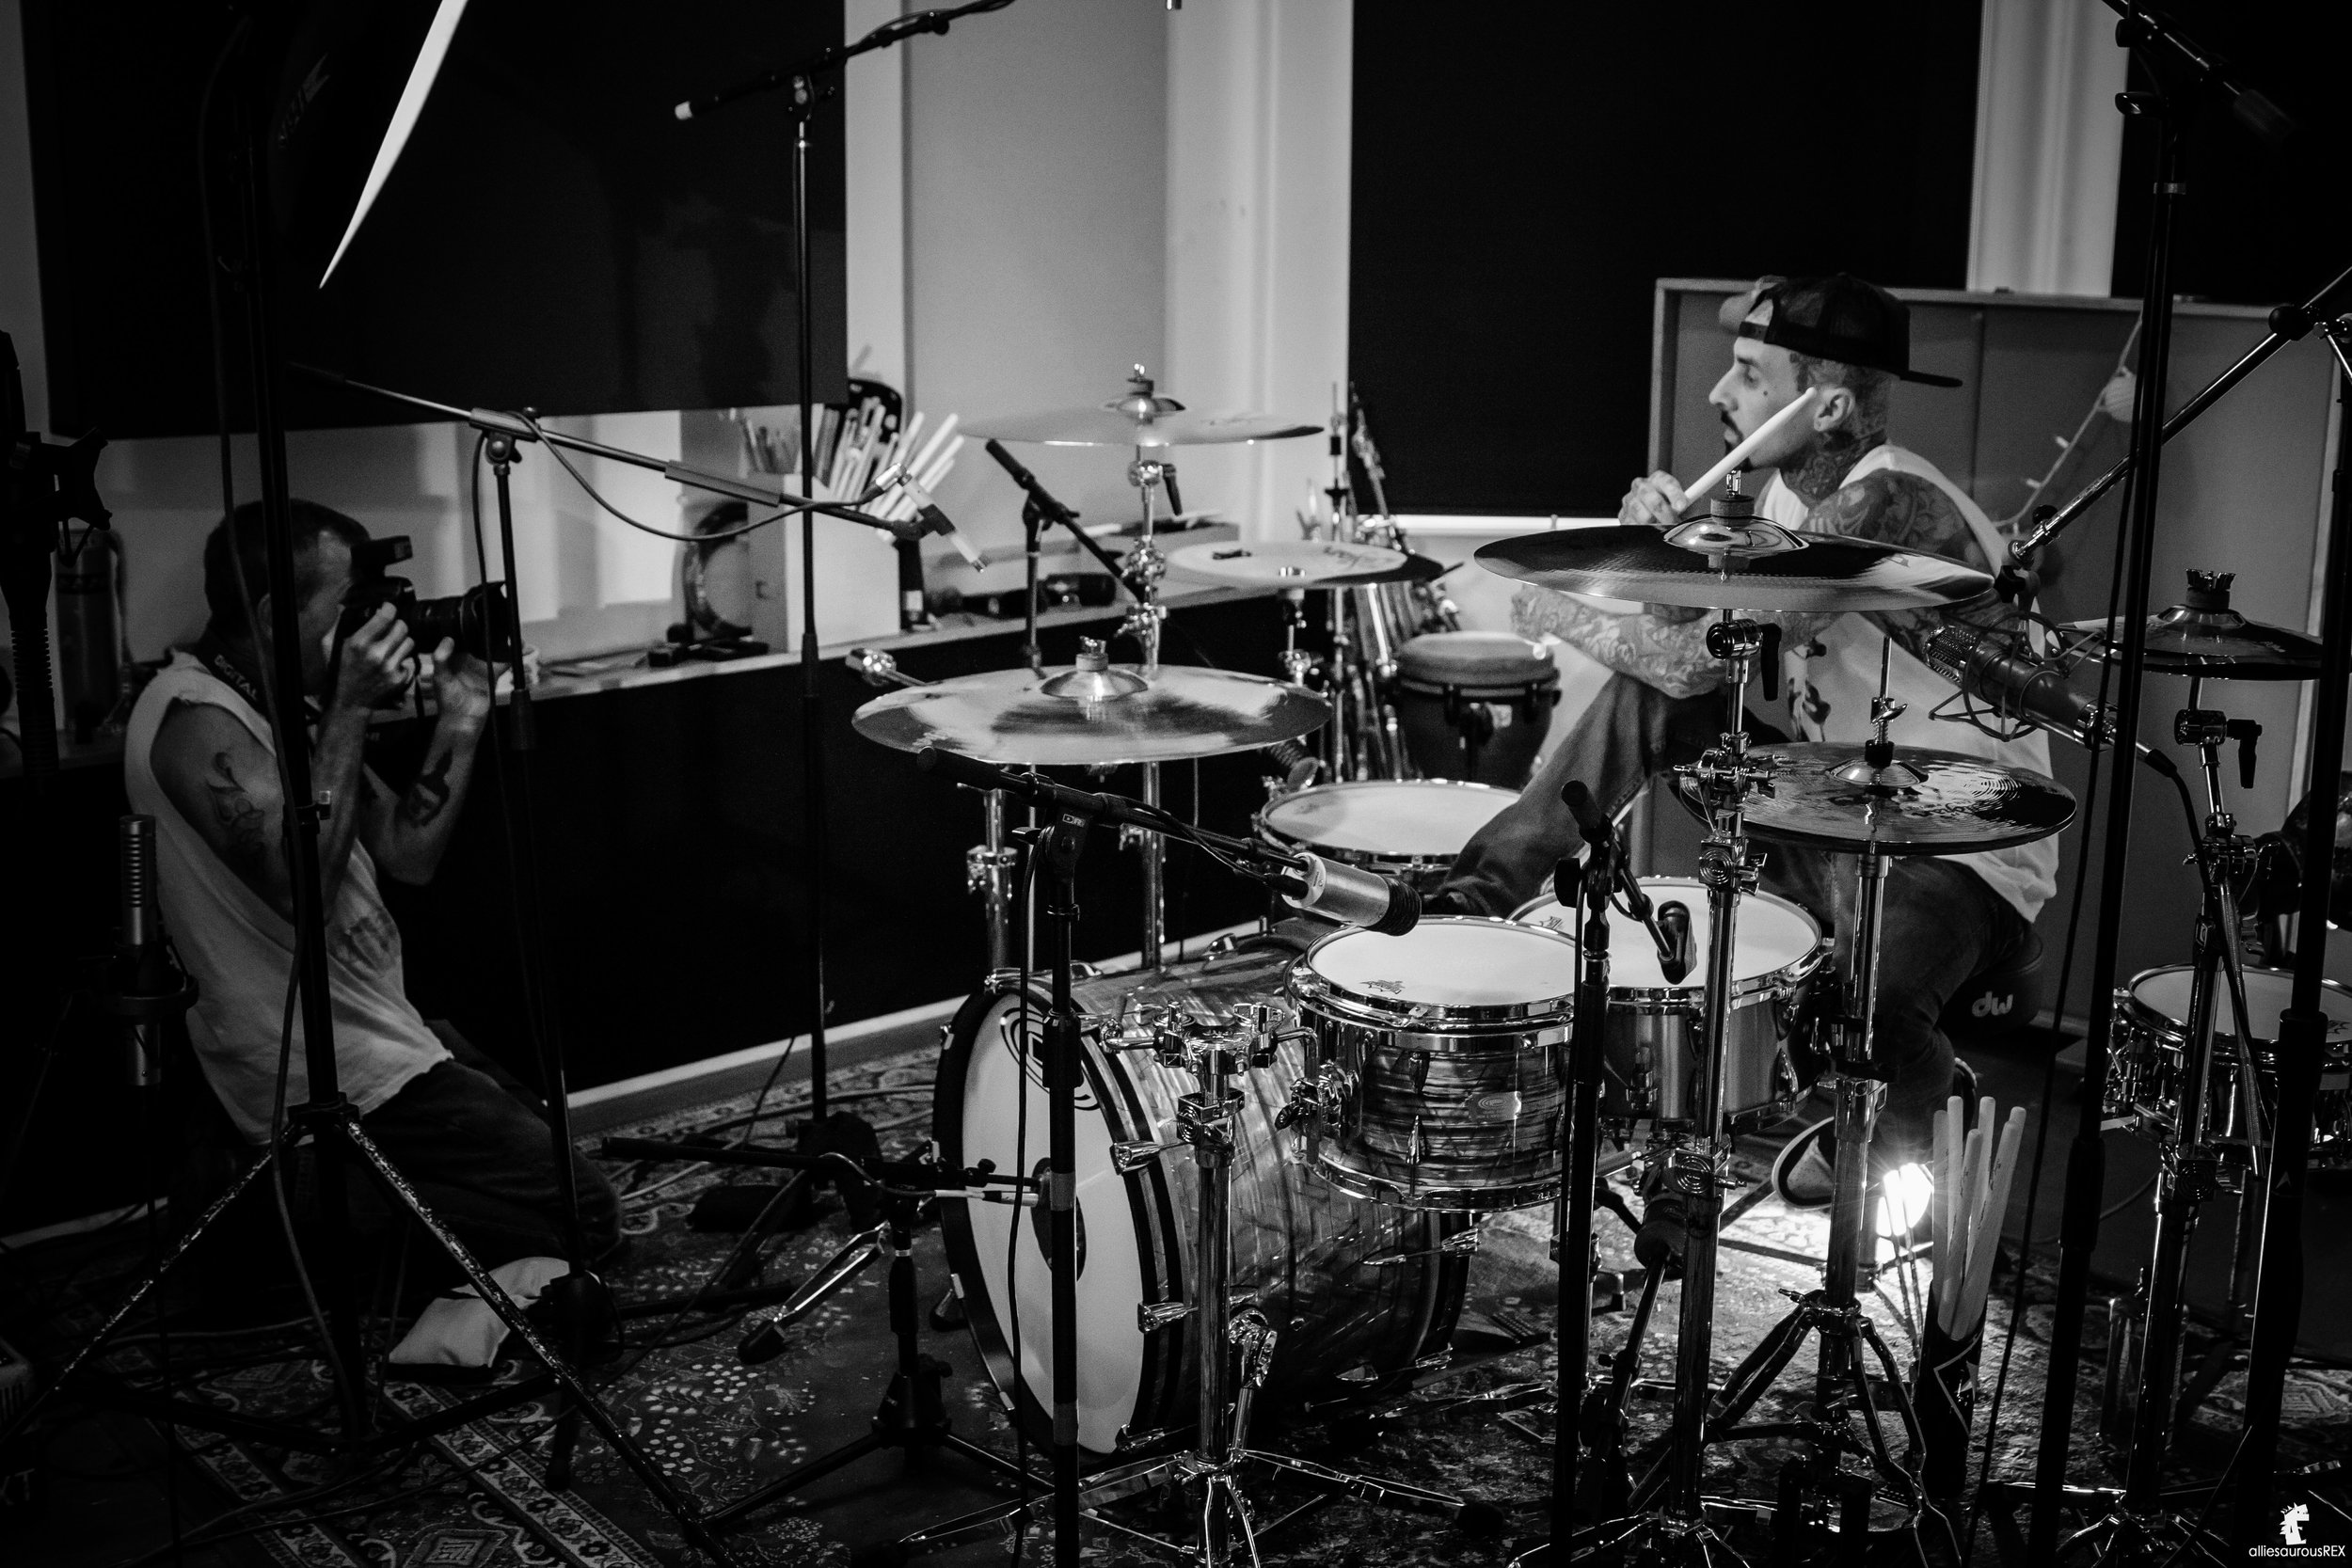  Travis Barker and photographer Neil Zlowzower shooting the cover for Drum Magazine at Foxy Studios 